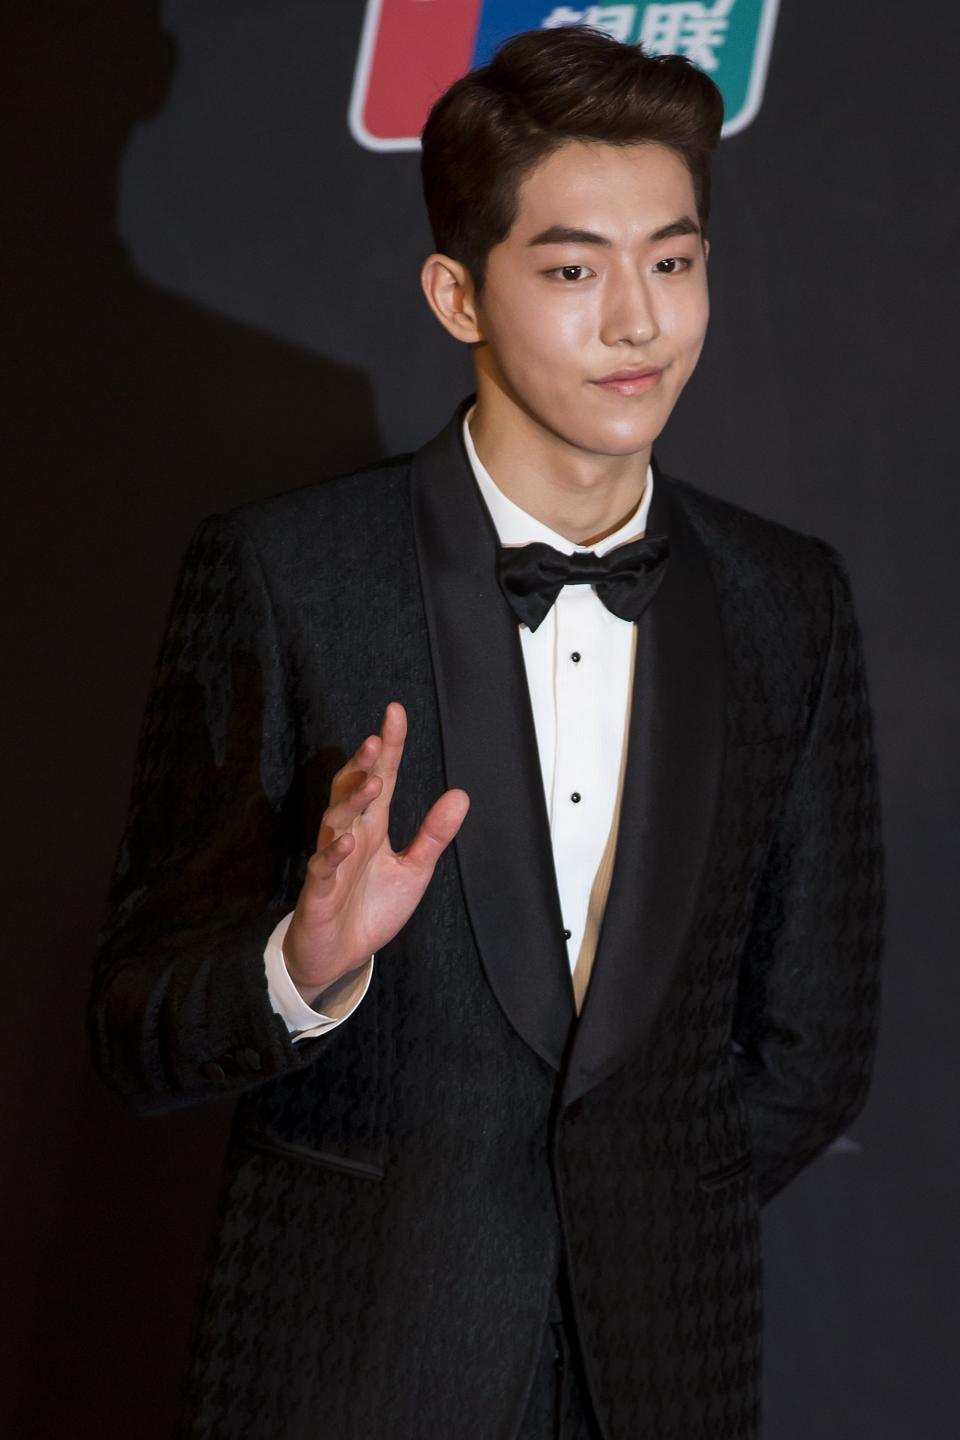 South Korean model Nam Joo Hyuk poses on the red carpet as he attends the 2014 Mnet Asian Music Awards (MAMA) in Hong Kong